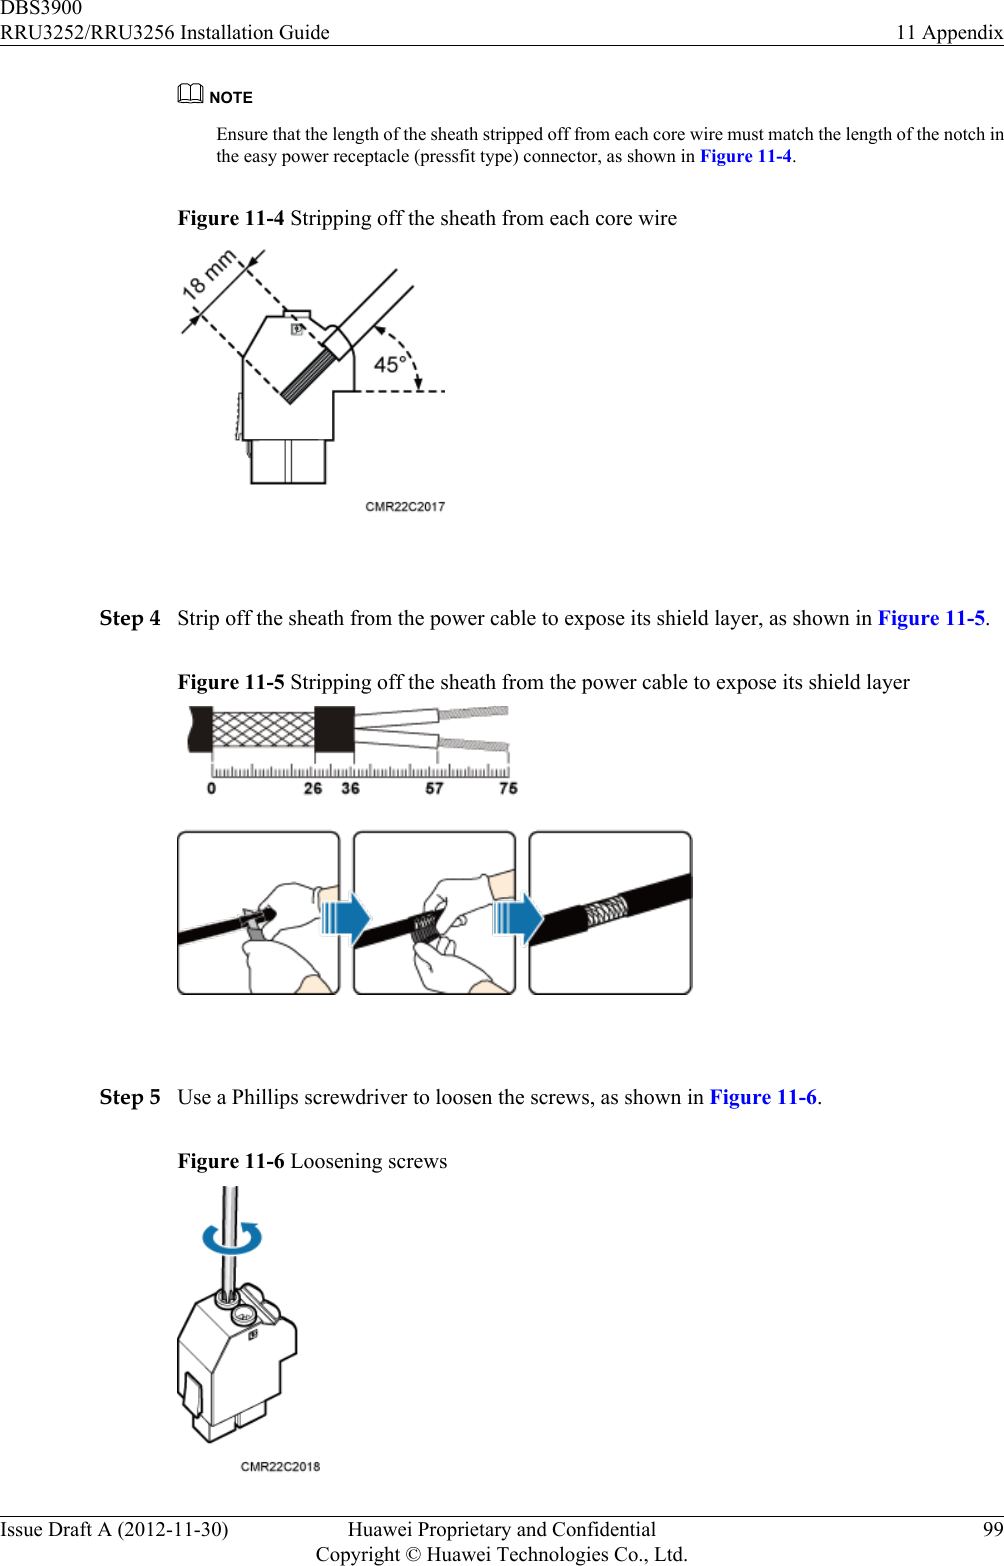 NOTEEnsure that the length of the sheath stripped off from each core wire must match the length of the notch inthe easy power receptacle (pressfit type) connector, as shown in Figure 11-4.Figure 11-4 Stripping off the sheath from each core wire Step 4 Strip off the sheath from the power cable to expose its shield layer, as shown in Figure 11-5.Figure 11-5 Stripping off the sheath from the power cable to expose its shield layer Step 5 Use a Phillips screwdriver to loosen the screws, as shown in Figure 11-6.Figure 11-6 Loosening screwsDBS3900RRU3252/RRU3256 Installation Guide 11 AppendixIssue Draft A (2012-11-30) Huawei Proprietary and ConfidentialCopyright © Huawei Technologies Co., Ltd.99